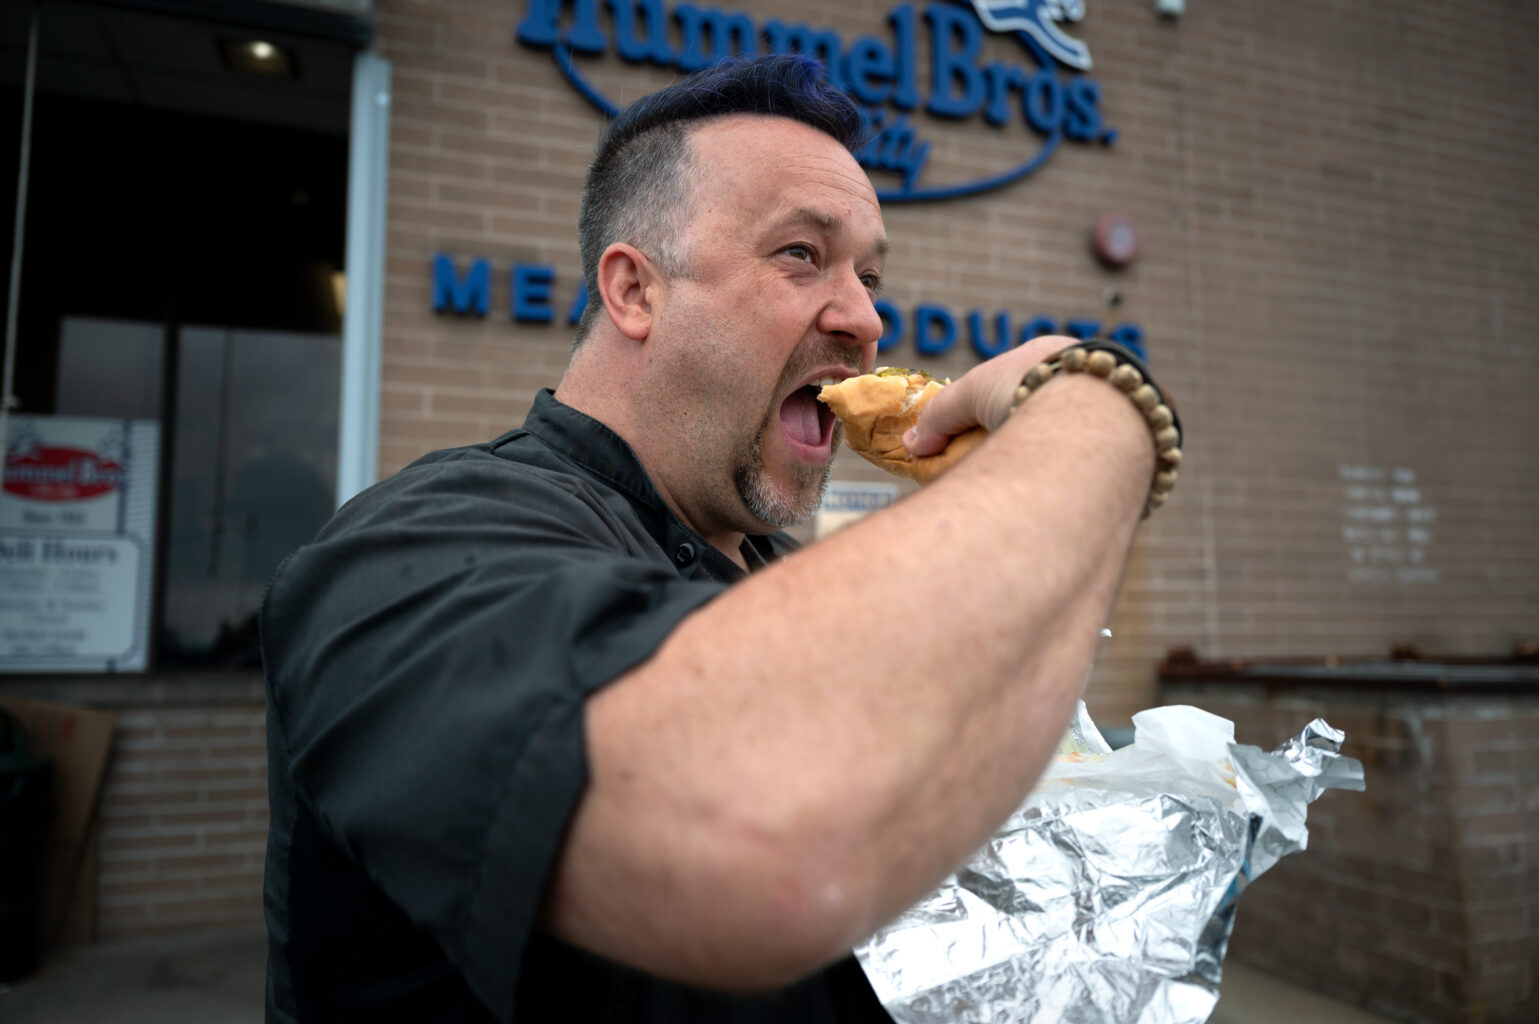 “Seasoned” host Chef Plum digs into a fresh dog after a tour of the Hummel Bros. Hot Dog factory in New Haven, Conn. 